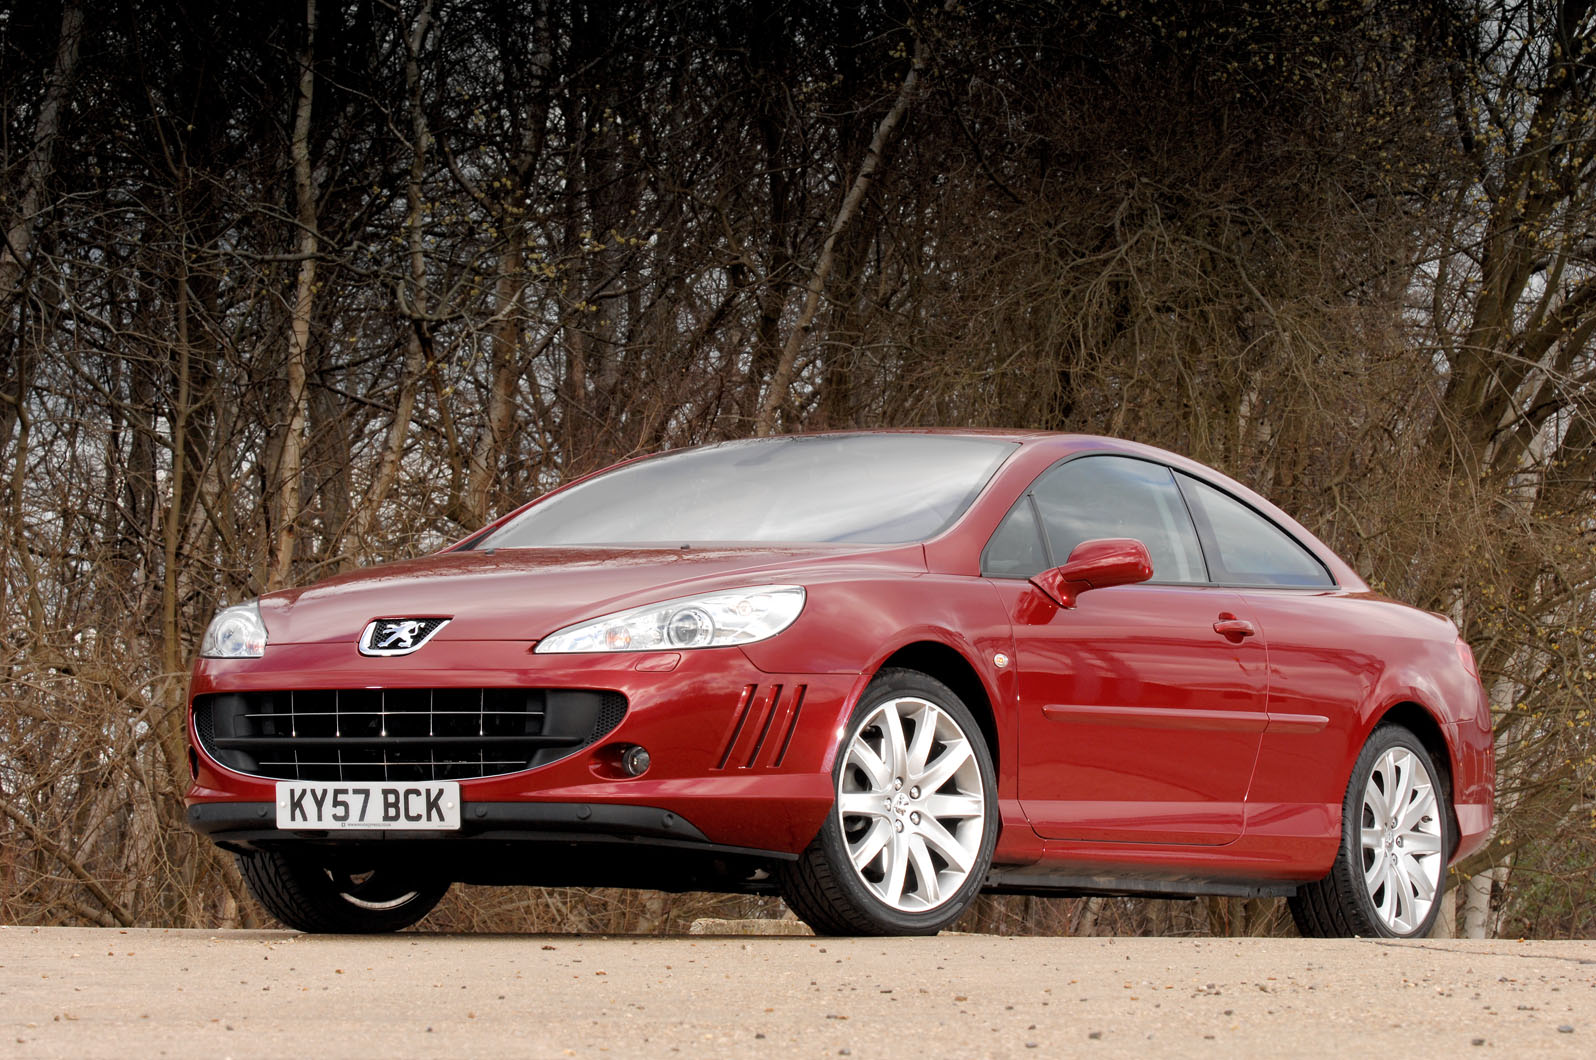 Peugeot 407 Coupe (2005 - 2011) used car review, Car review